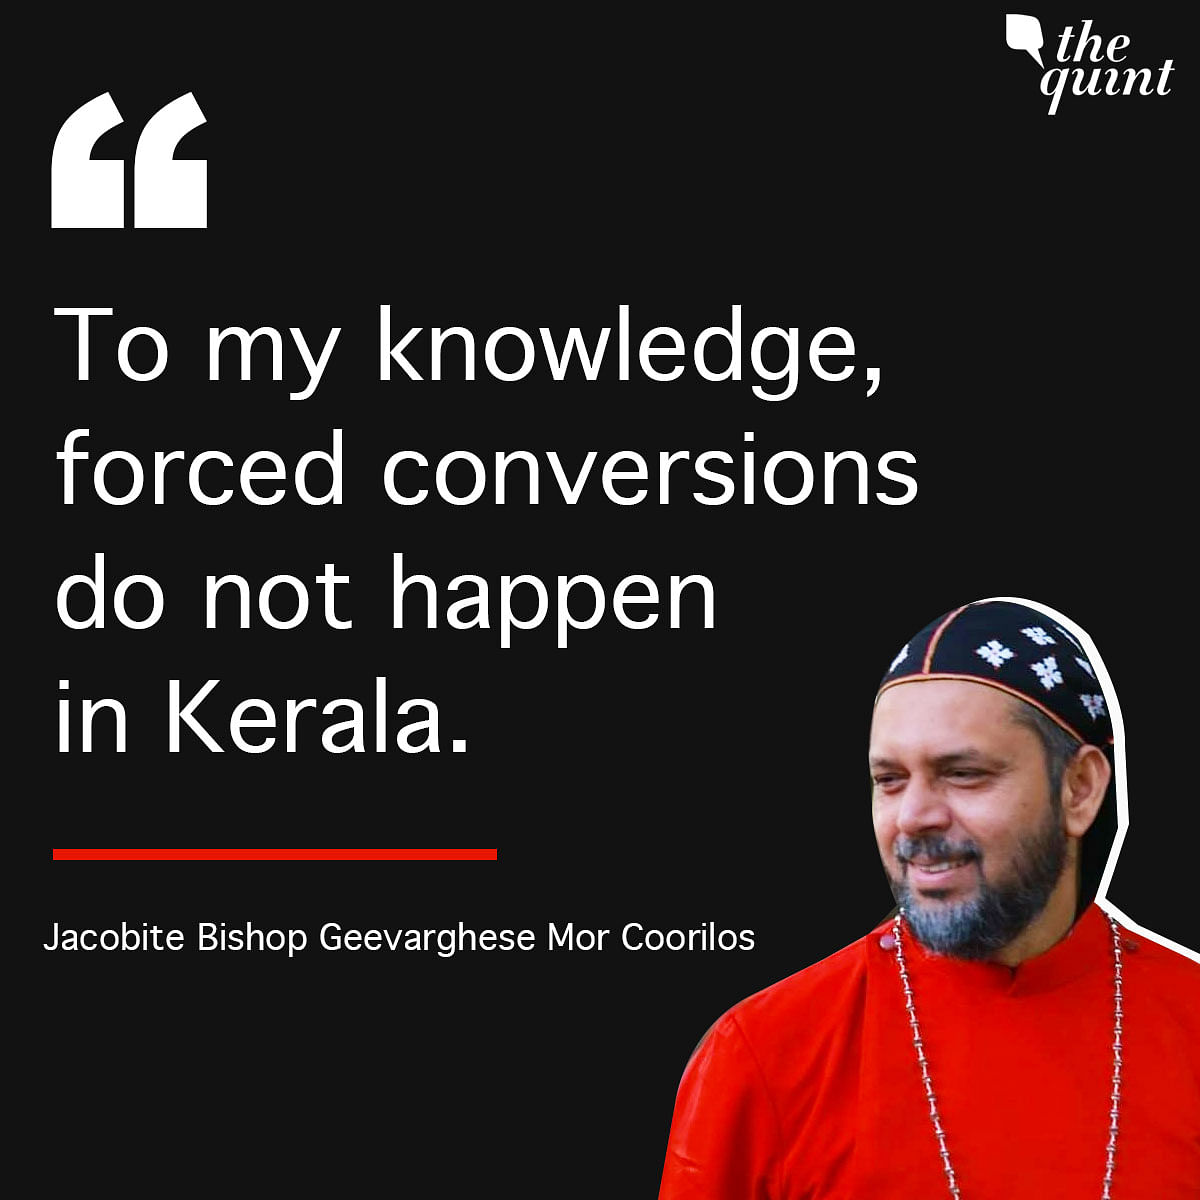 Bishop Geevarghese Mor Coorilos says those in power should not give statements which can be used by communal forces.